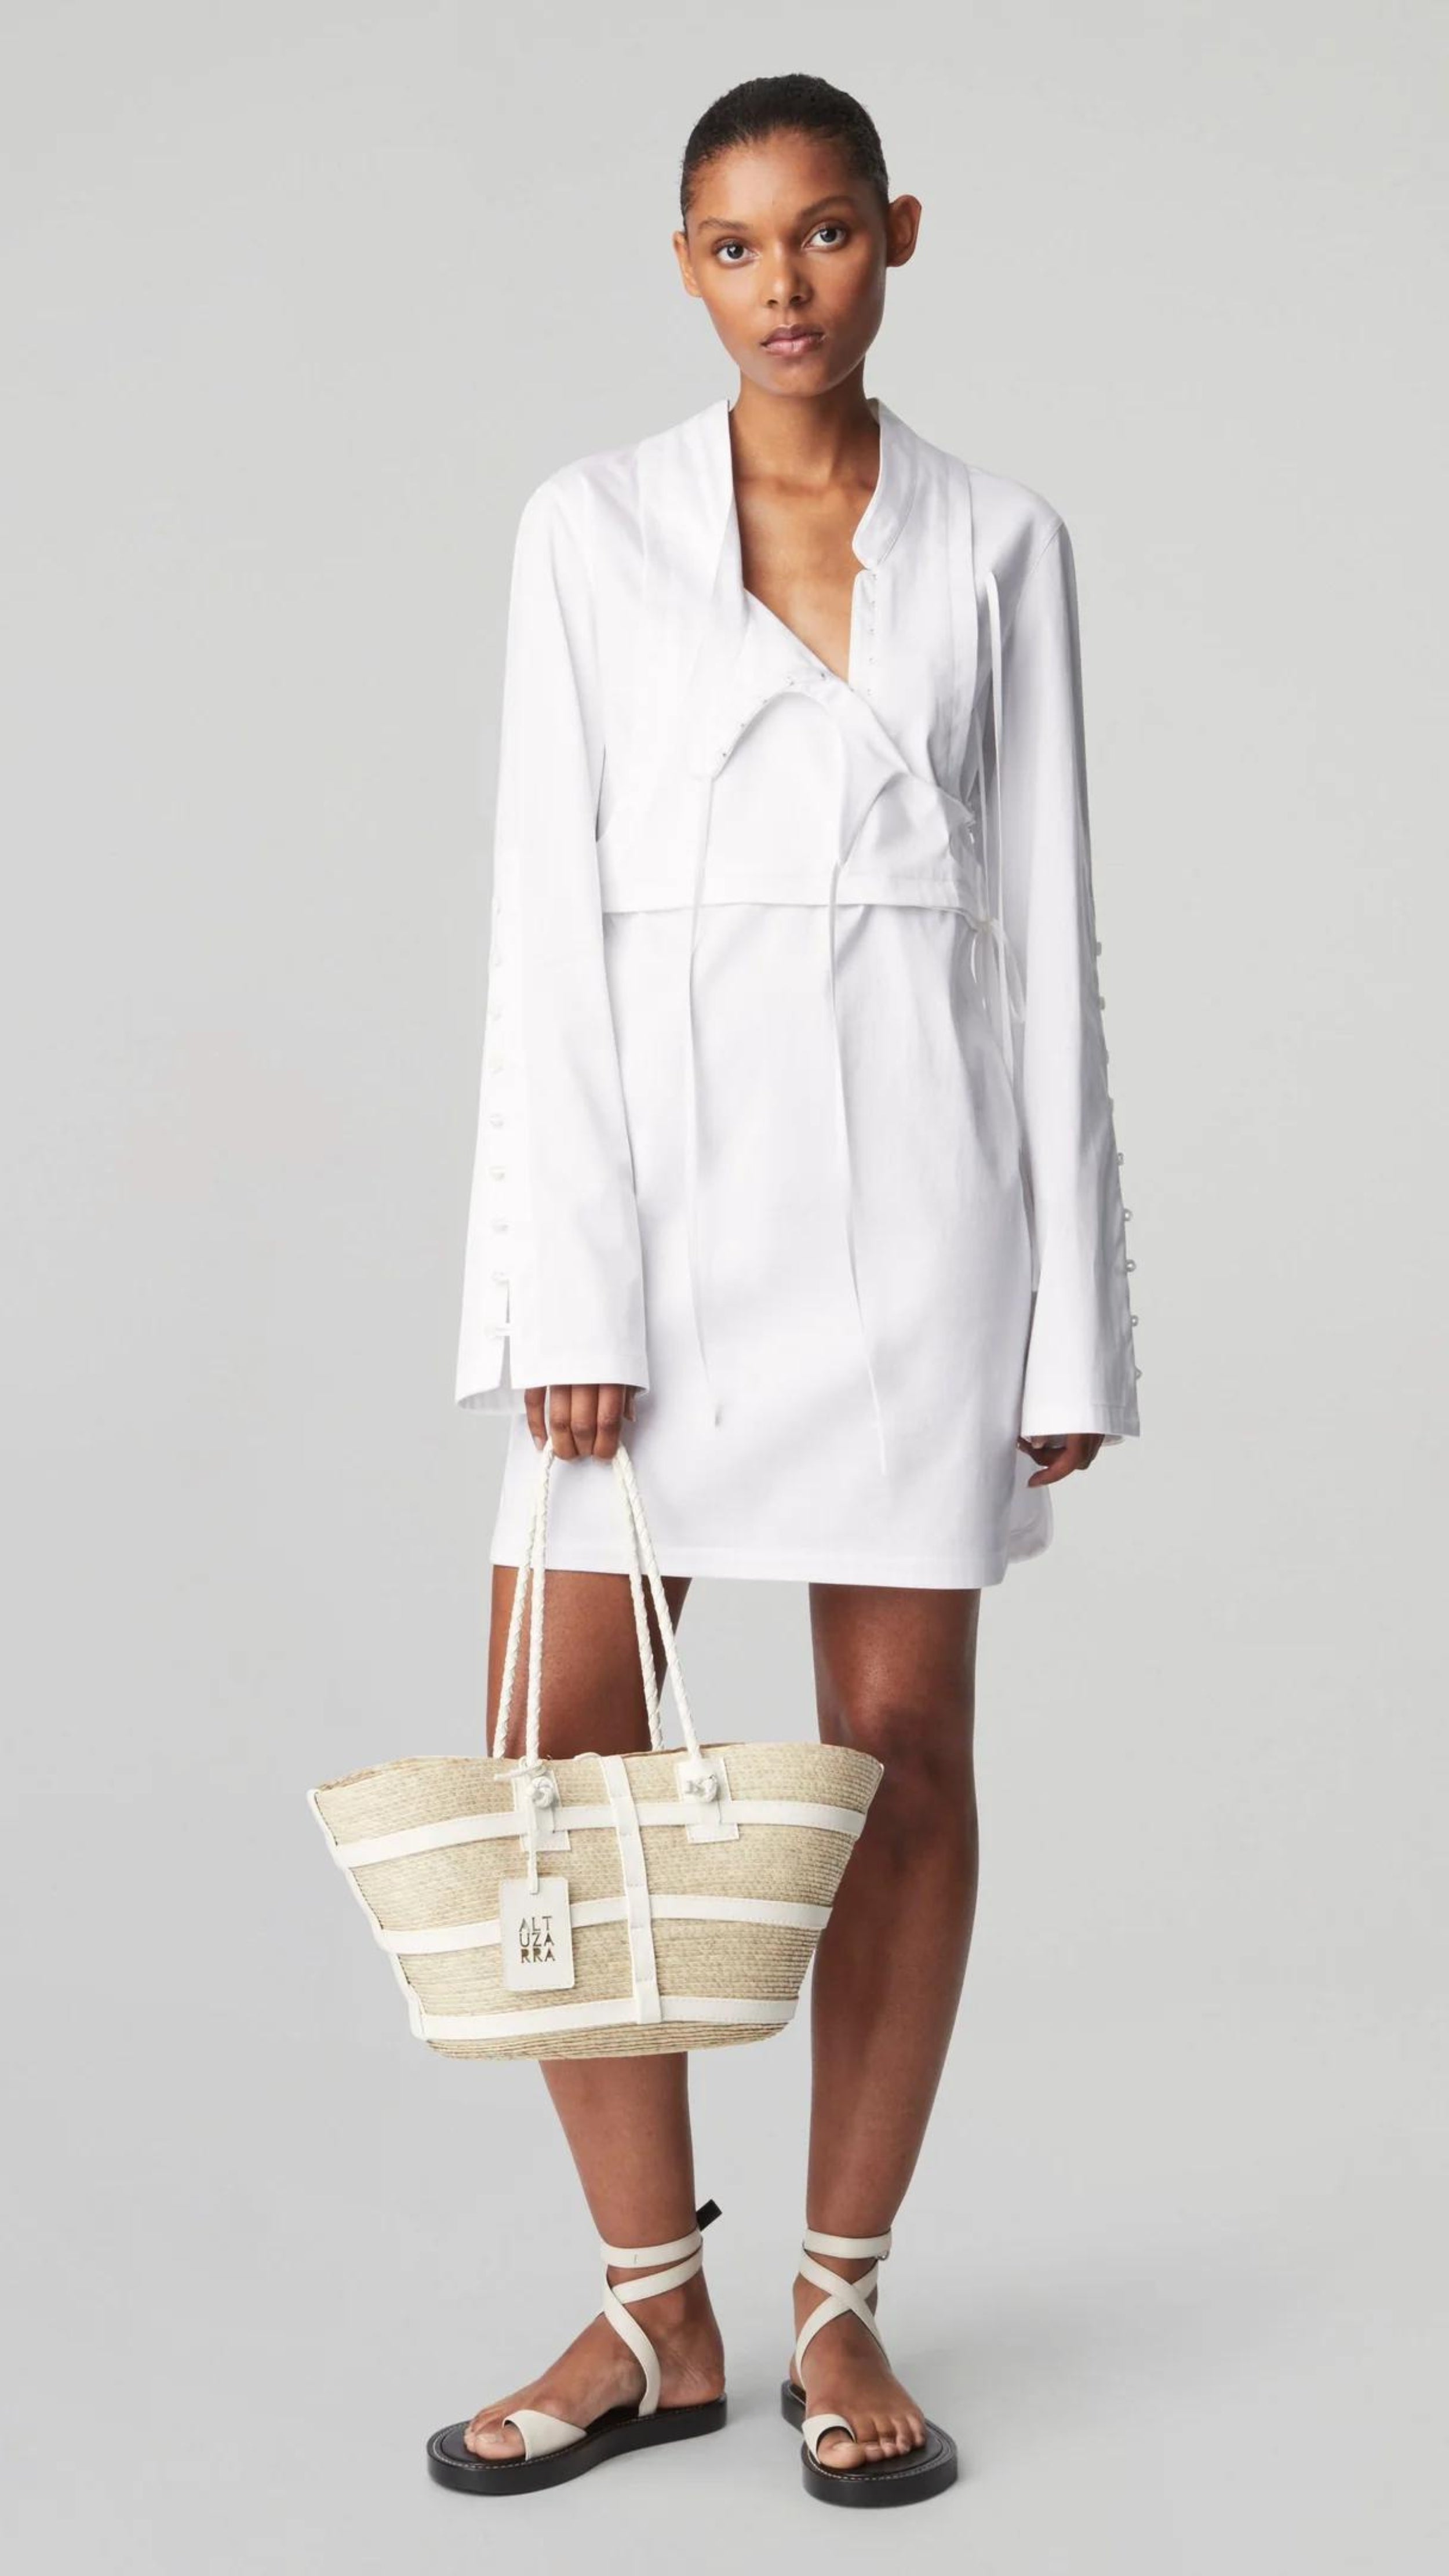 Altuzara Watermill Bag Small in White. Crafted in Mexico from natural palm fibers and detailed with soft white leather. The hand straps are braided leather and it comes with a laser cut detailed Altuzarra hang tag. This photo shows the bag being held by the model.